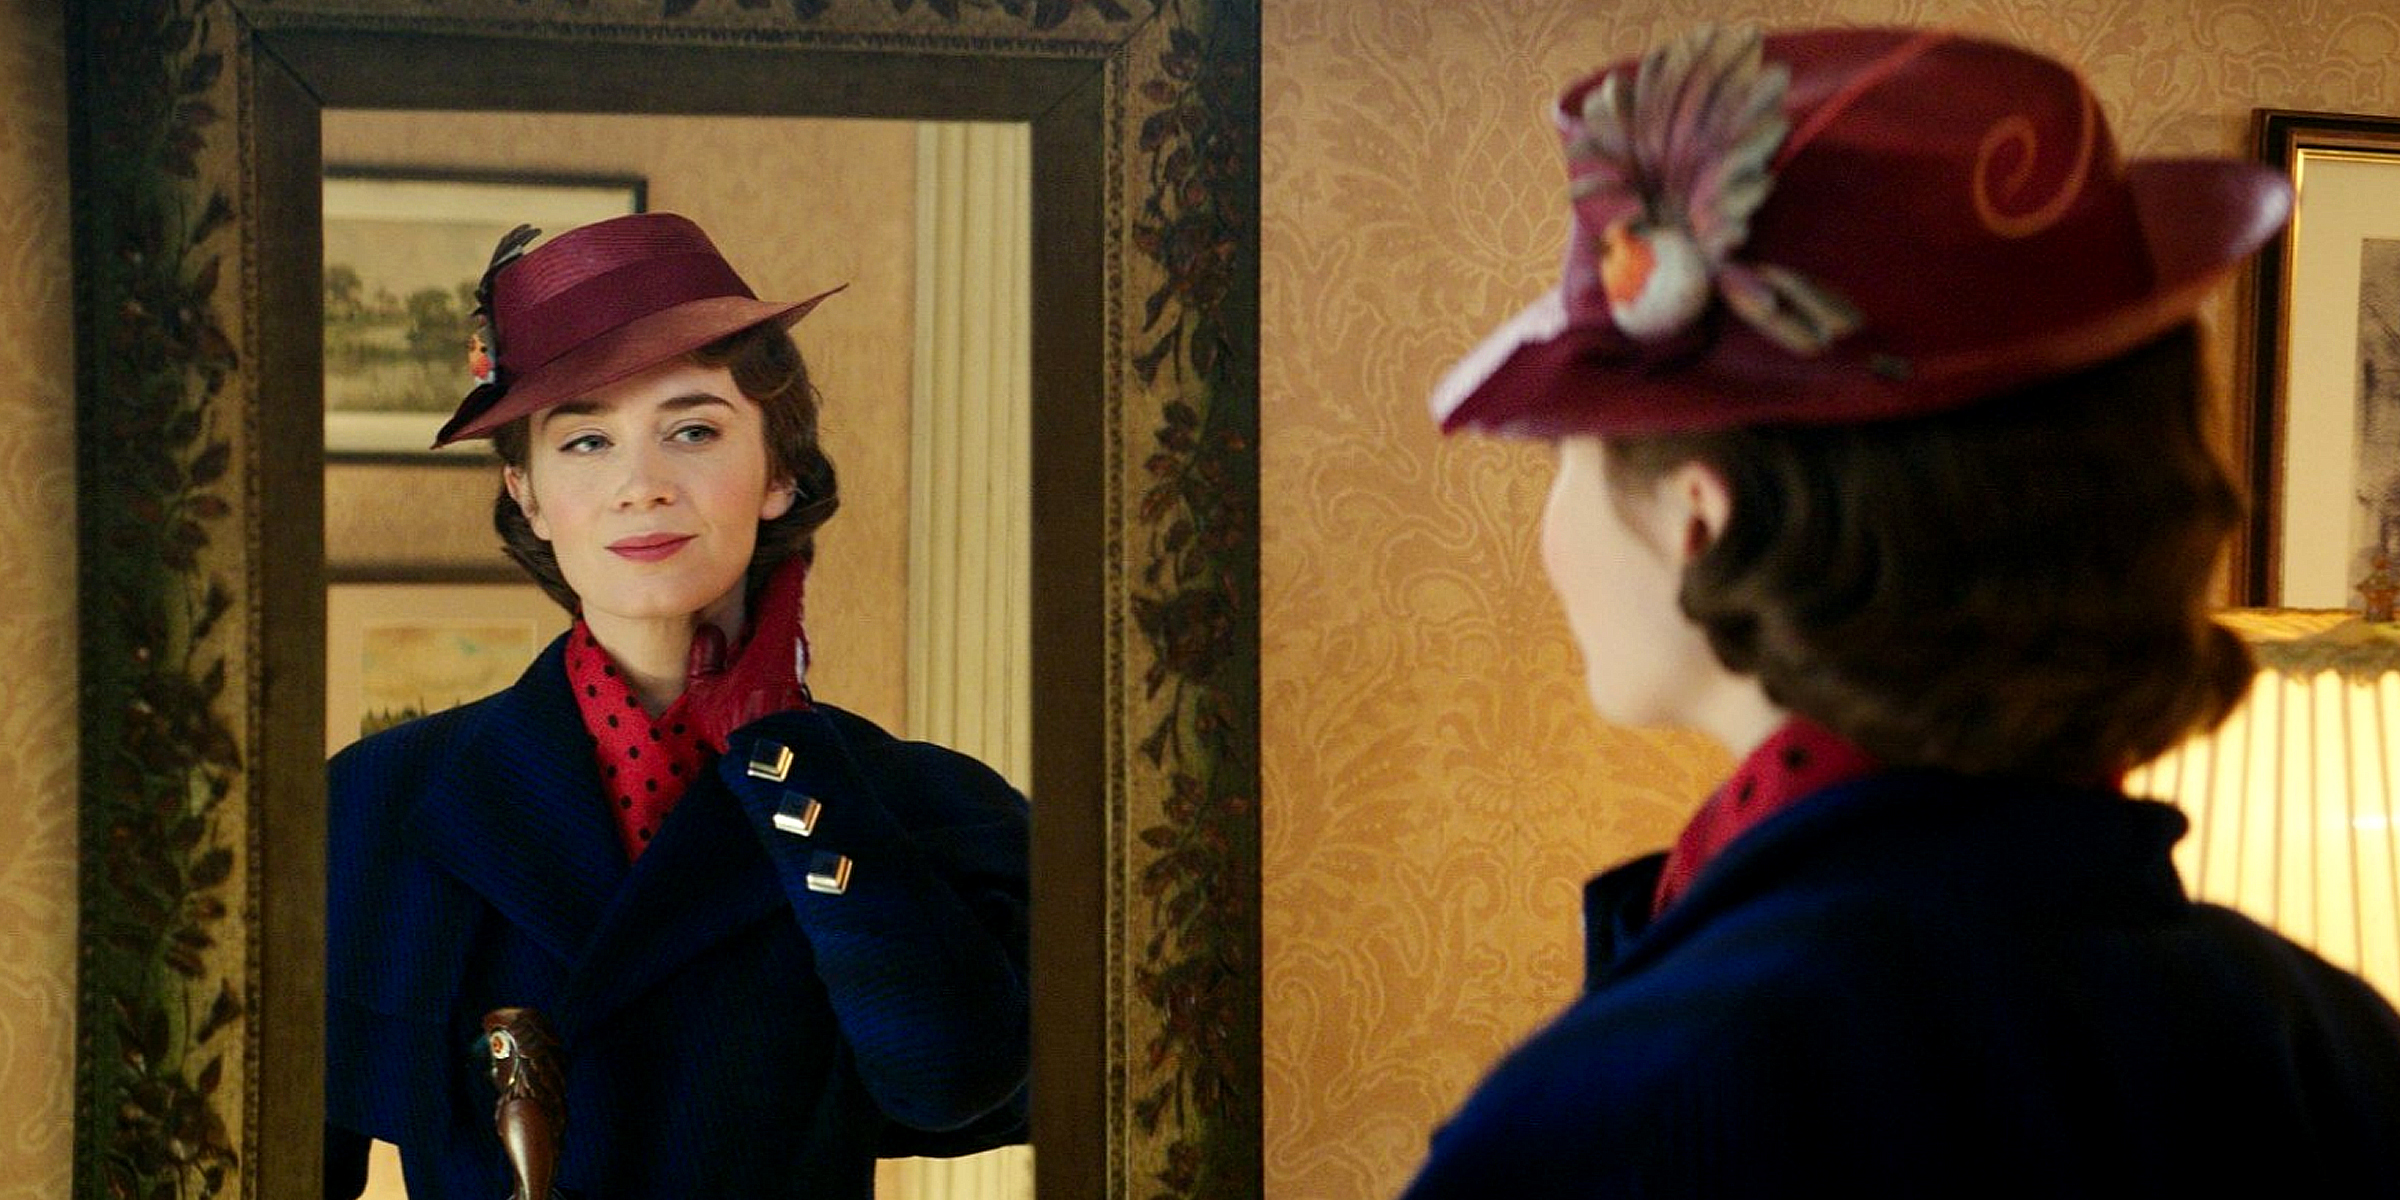 Emily Blunt is Mary Poppins and Joel Dawson is Georgie Banks in Disney’s MARY POPPINS RETURNS, a sequel to the 1964 MARY POPPINS, which takes audiences on an entirely new adventure with the practically perfect nanny and the Banks family.